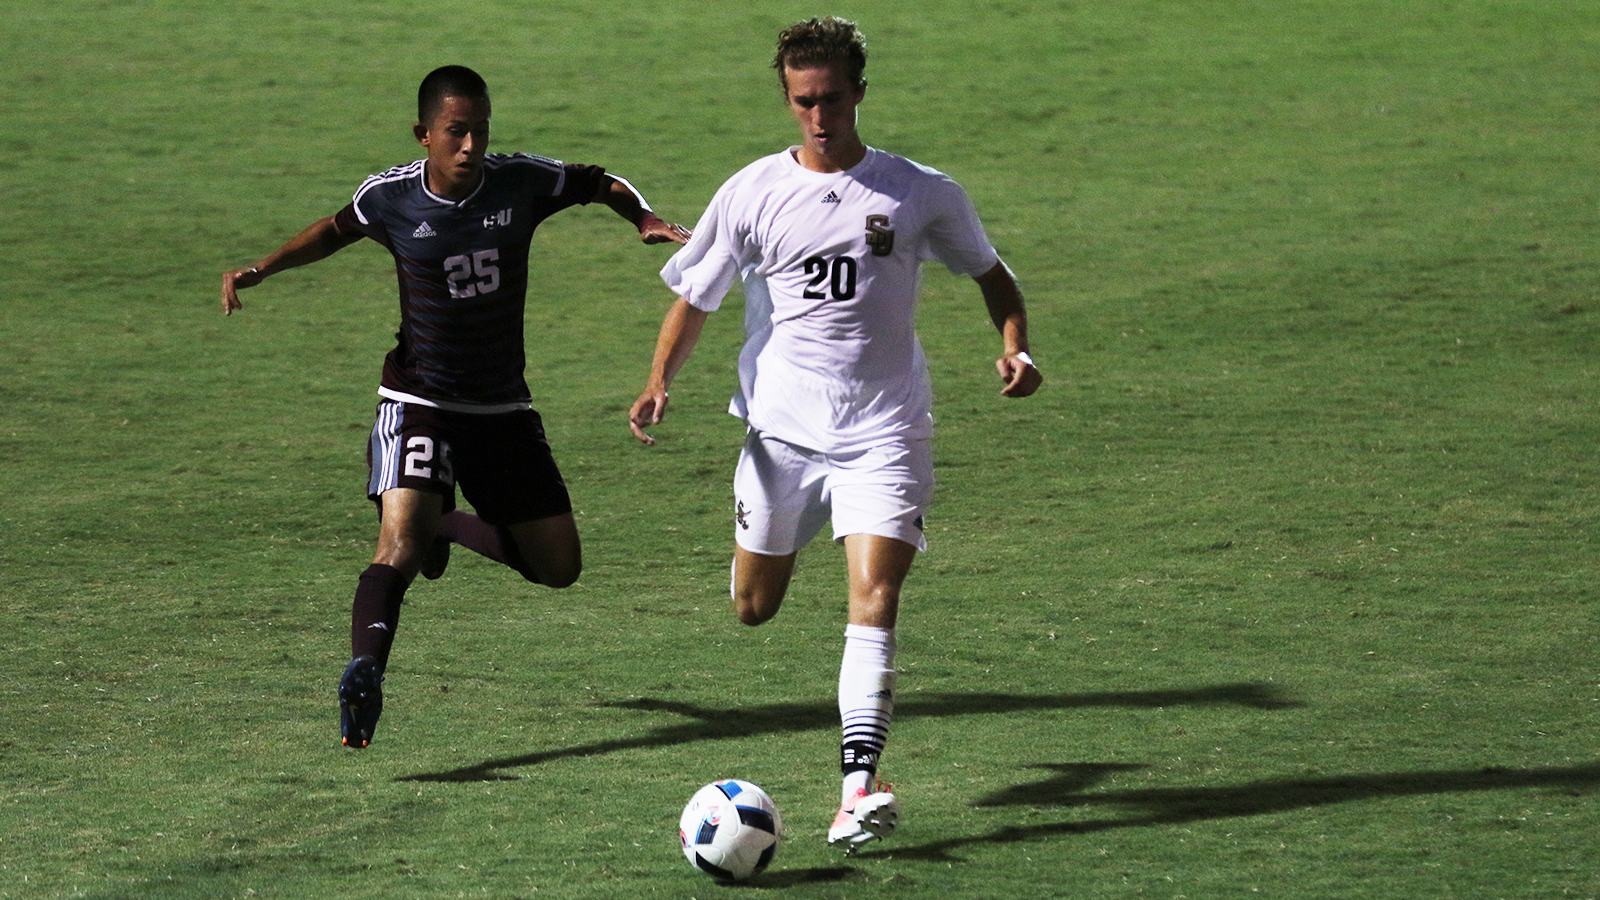 Pirates Play to Draw in Home Opener Against Schreiner